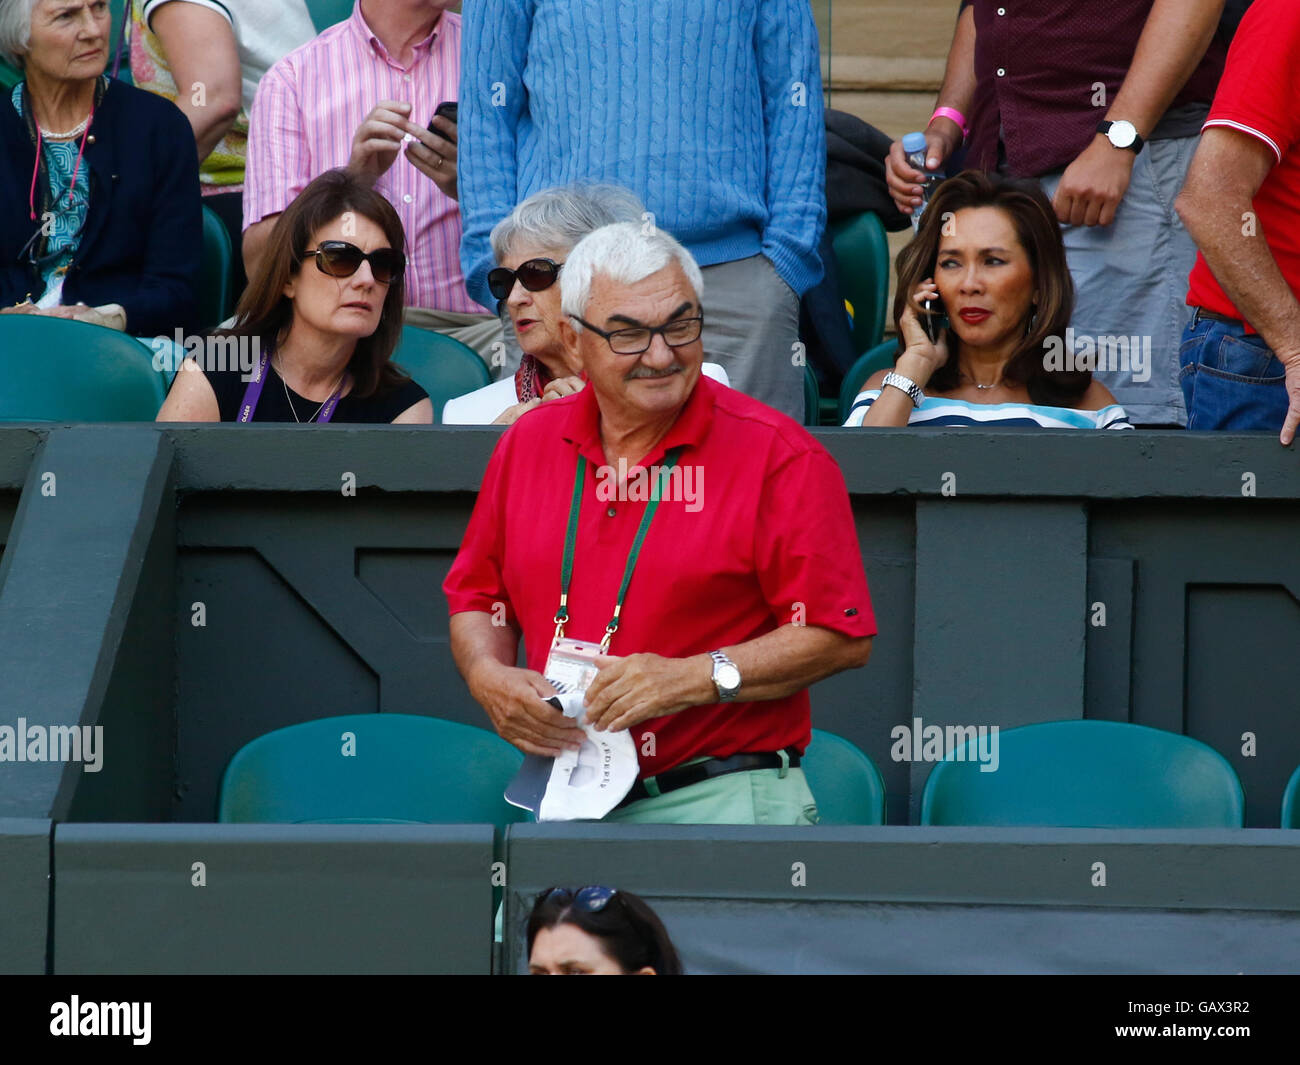 London, UK. 6th July, 2016. All England Lawn Tennis and Croquet Club, London, England. The Wimbledon Tennis Championships Day 10.  Robert Federer's father in the players' box on Centre Court during quarter final between number 3 seed, Roger Federer (SUI) and number 9 seed, Marin Cilic (CRO). © Action Plus Sports Images/Alamy Live News Credit:  Action Plus Sports Images/Alamy Live News Stock Photo